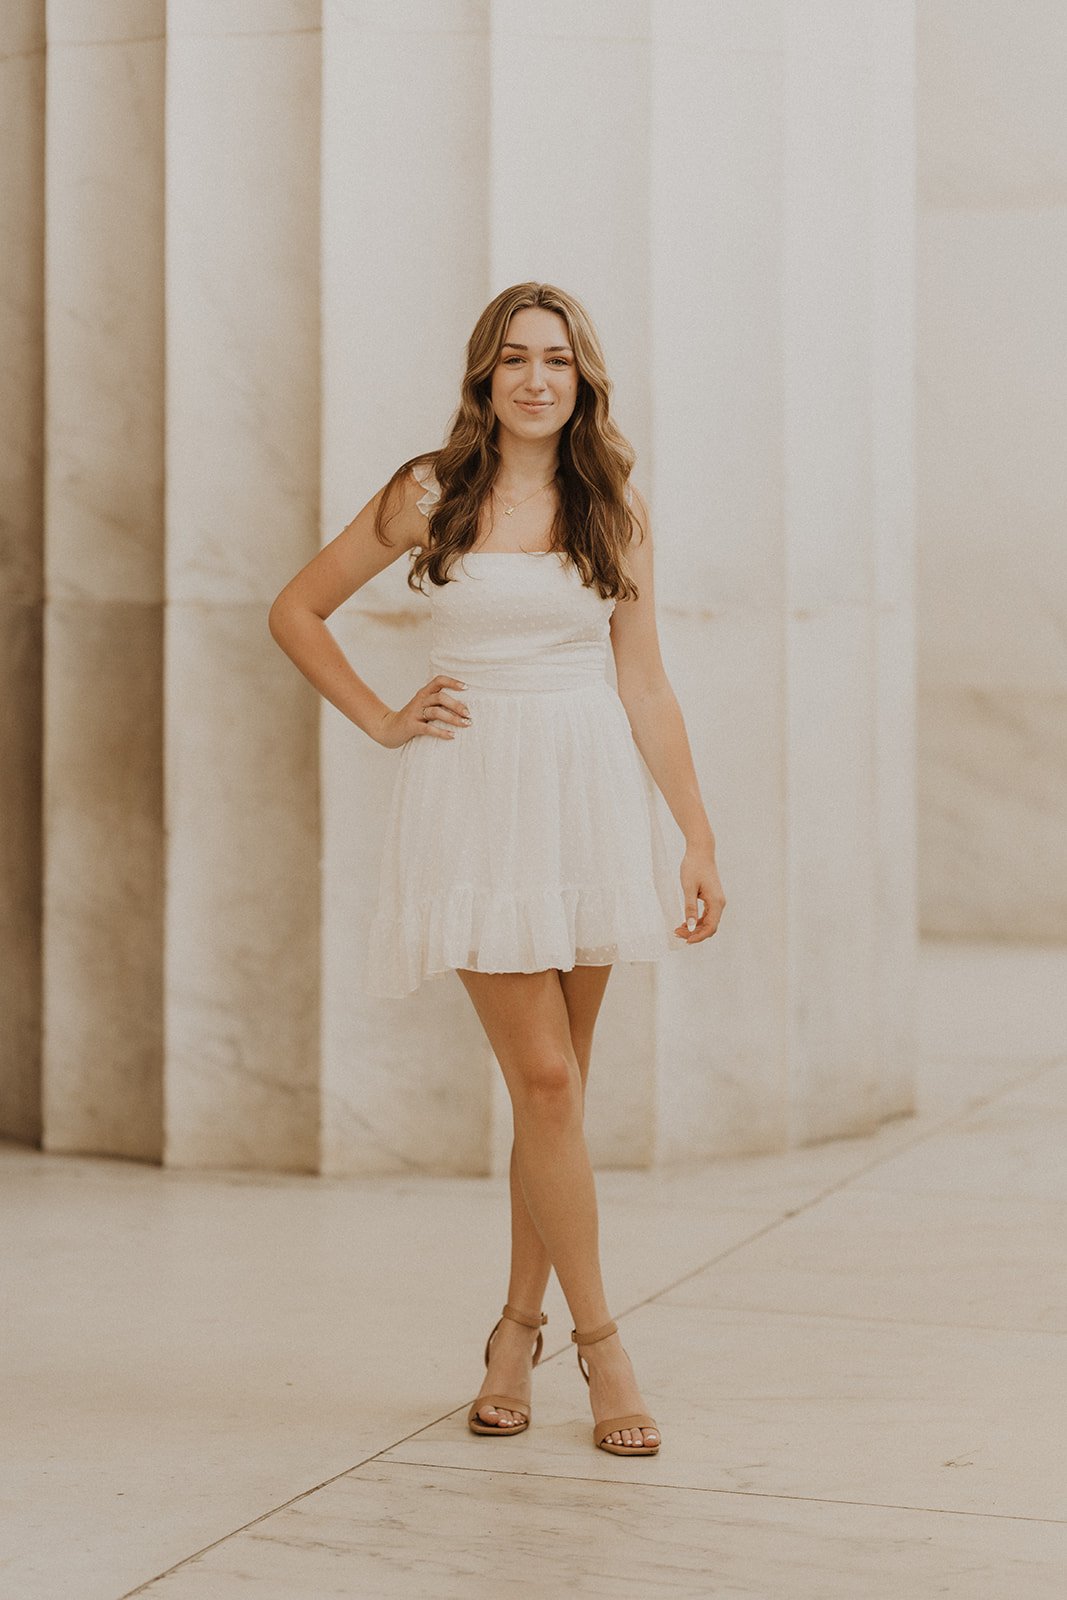 Senior Portraits at The National Mall in Washington, D.C.-6